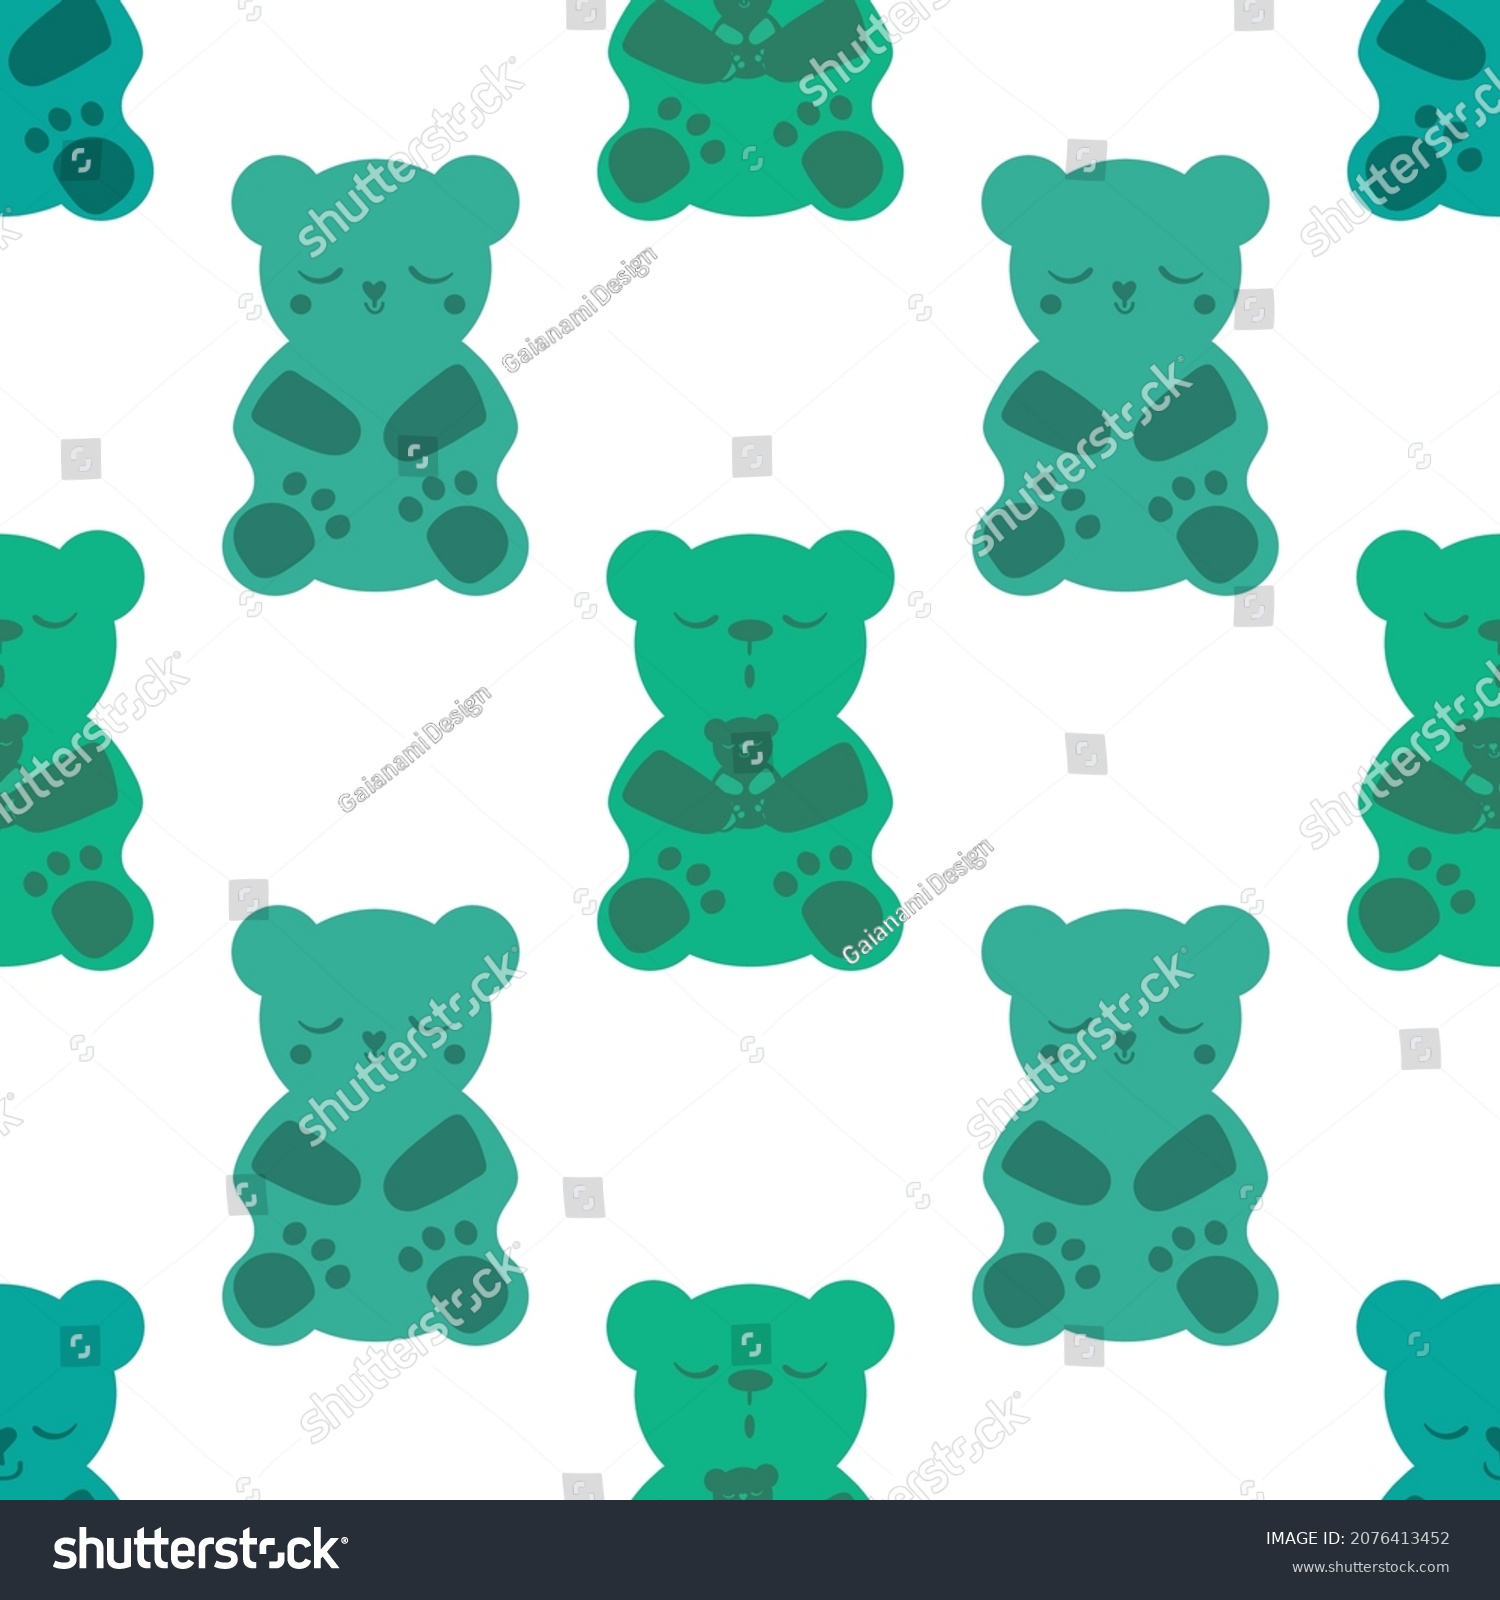 SVG of Sleep gummies vector seamless pattern background. Backdrop with gummy bears in blue, green white. Cute kawaii style characters for sleeping well, melatonin natural aid and health concept. For wellness svg